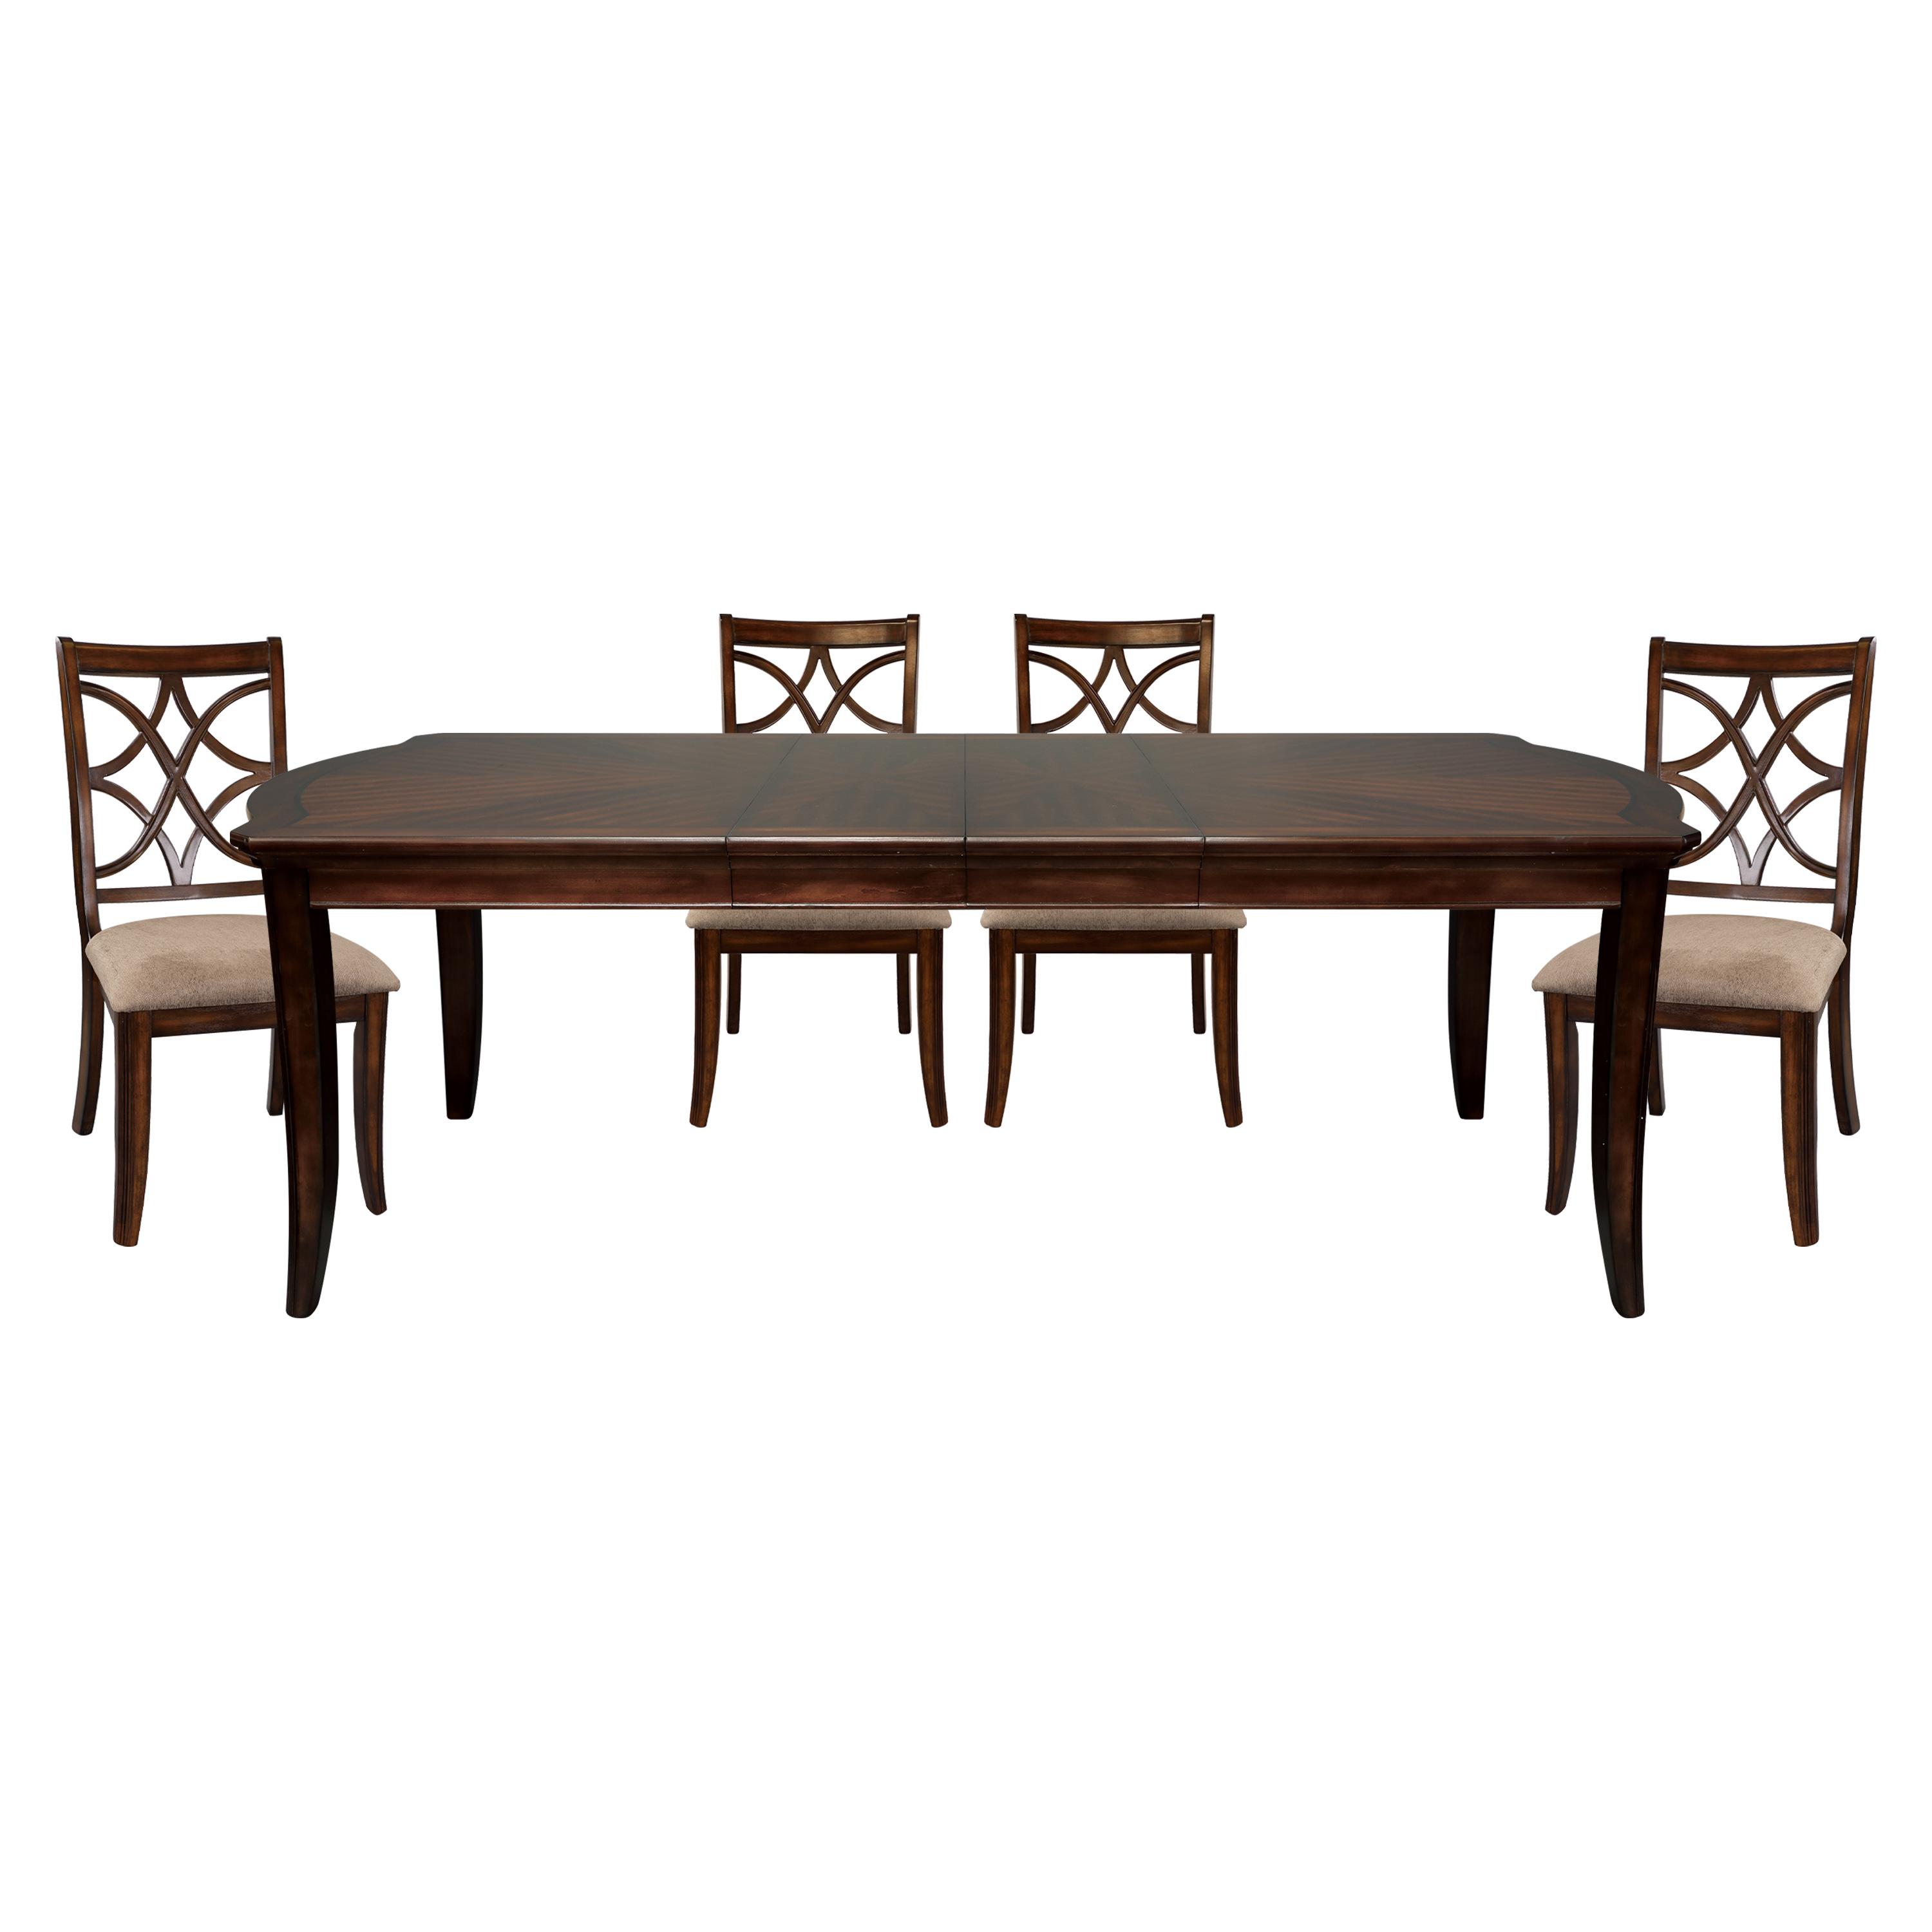 Traditional Dining Room Set 2546-96*5PC Keegan 2546-96*5PC in Cherry Chenille